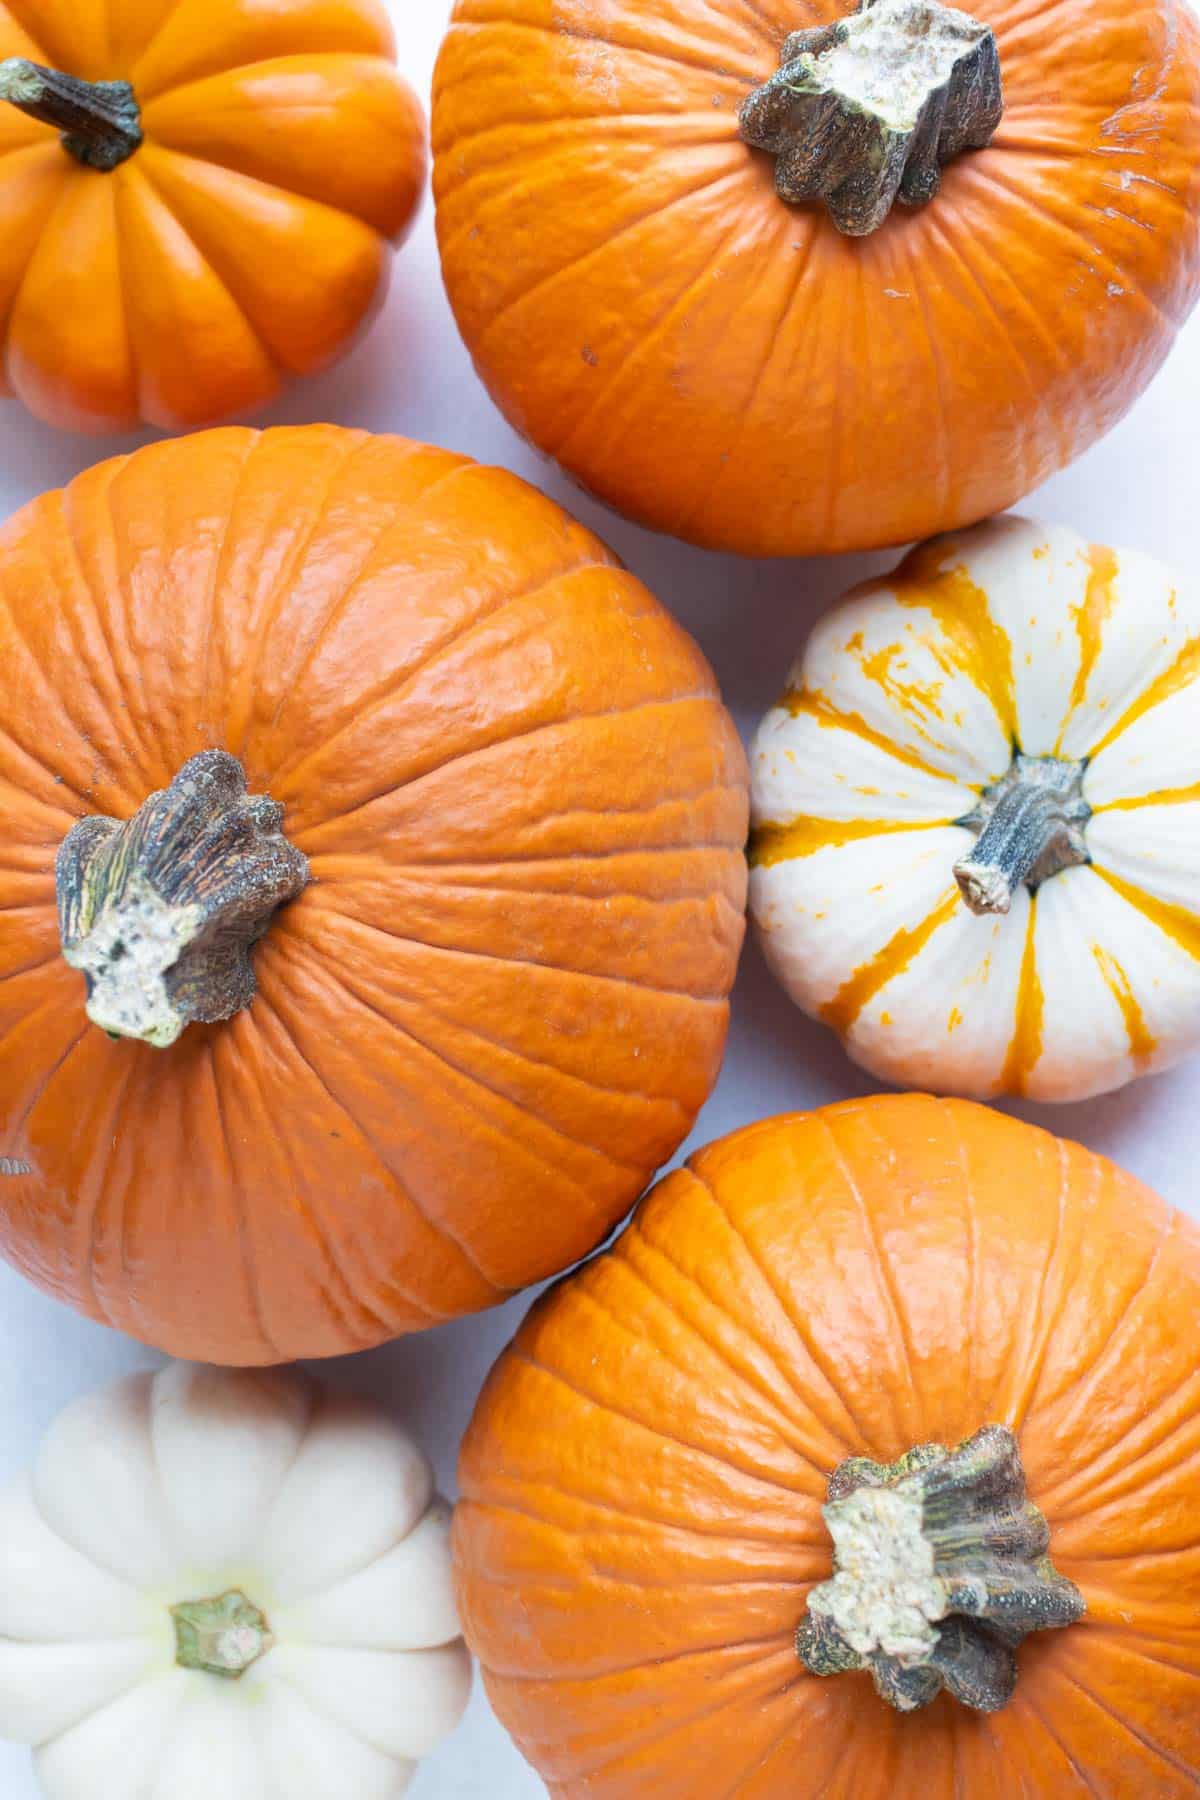 Learn how to make pumpkin puree from different types of pumpkins.